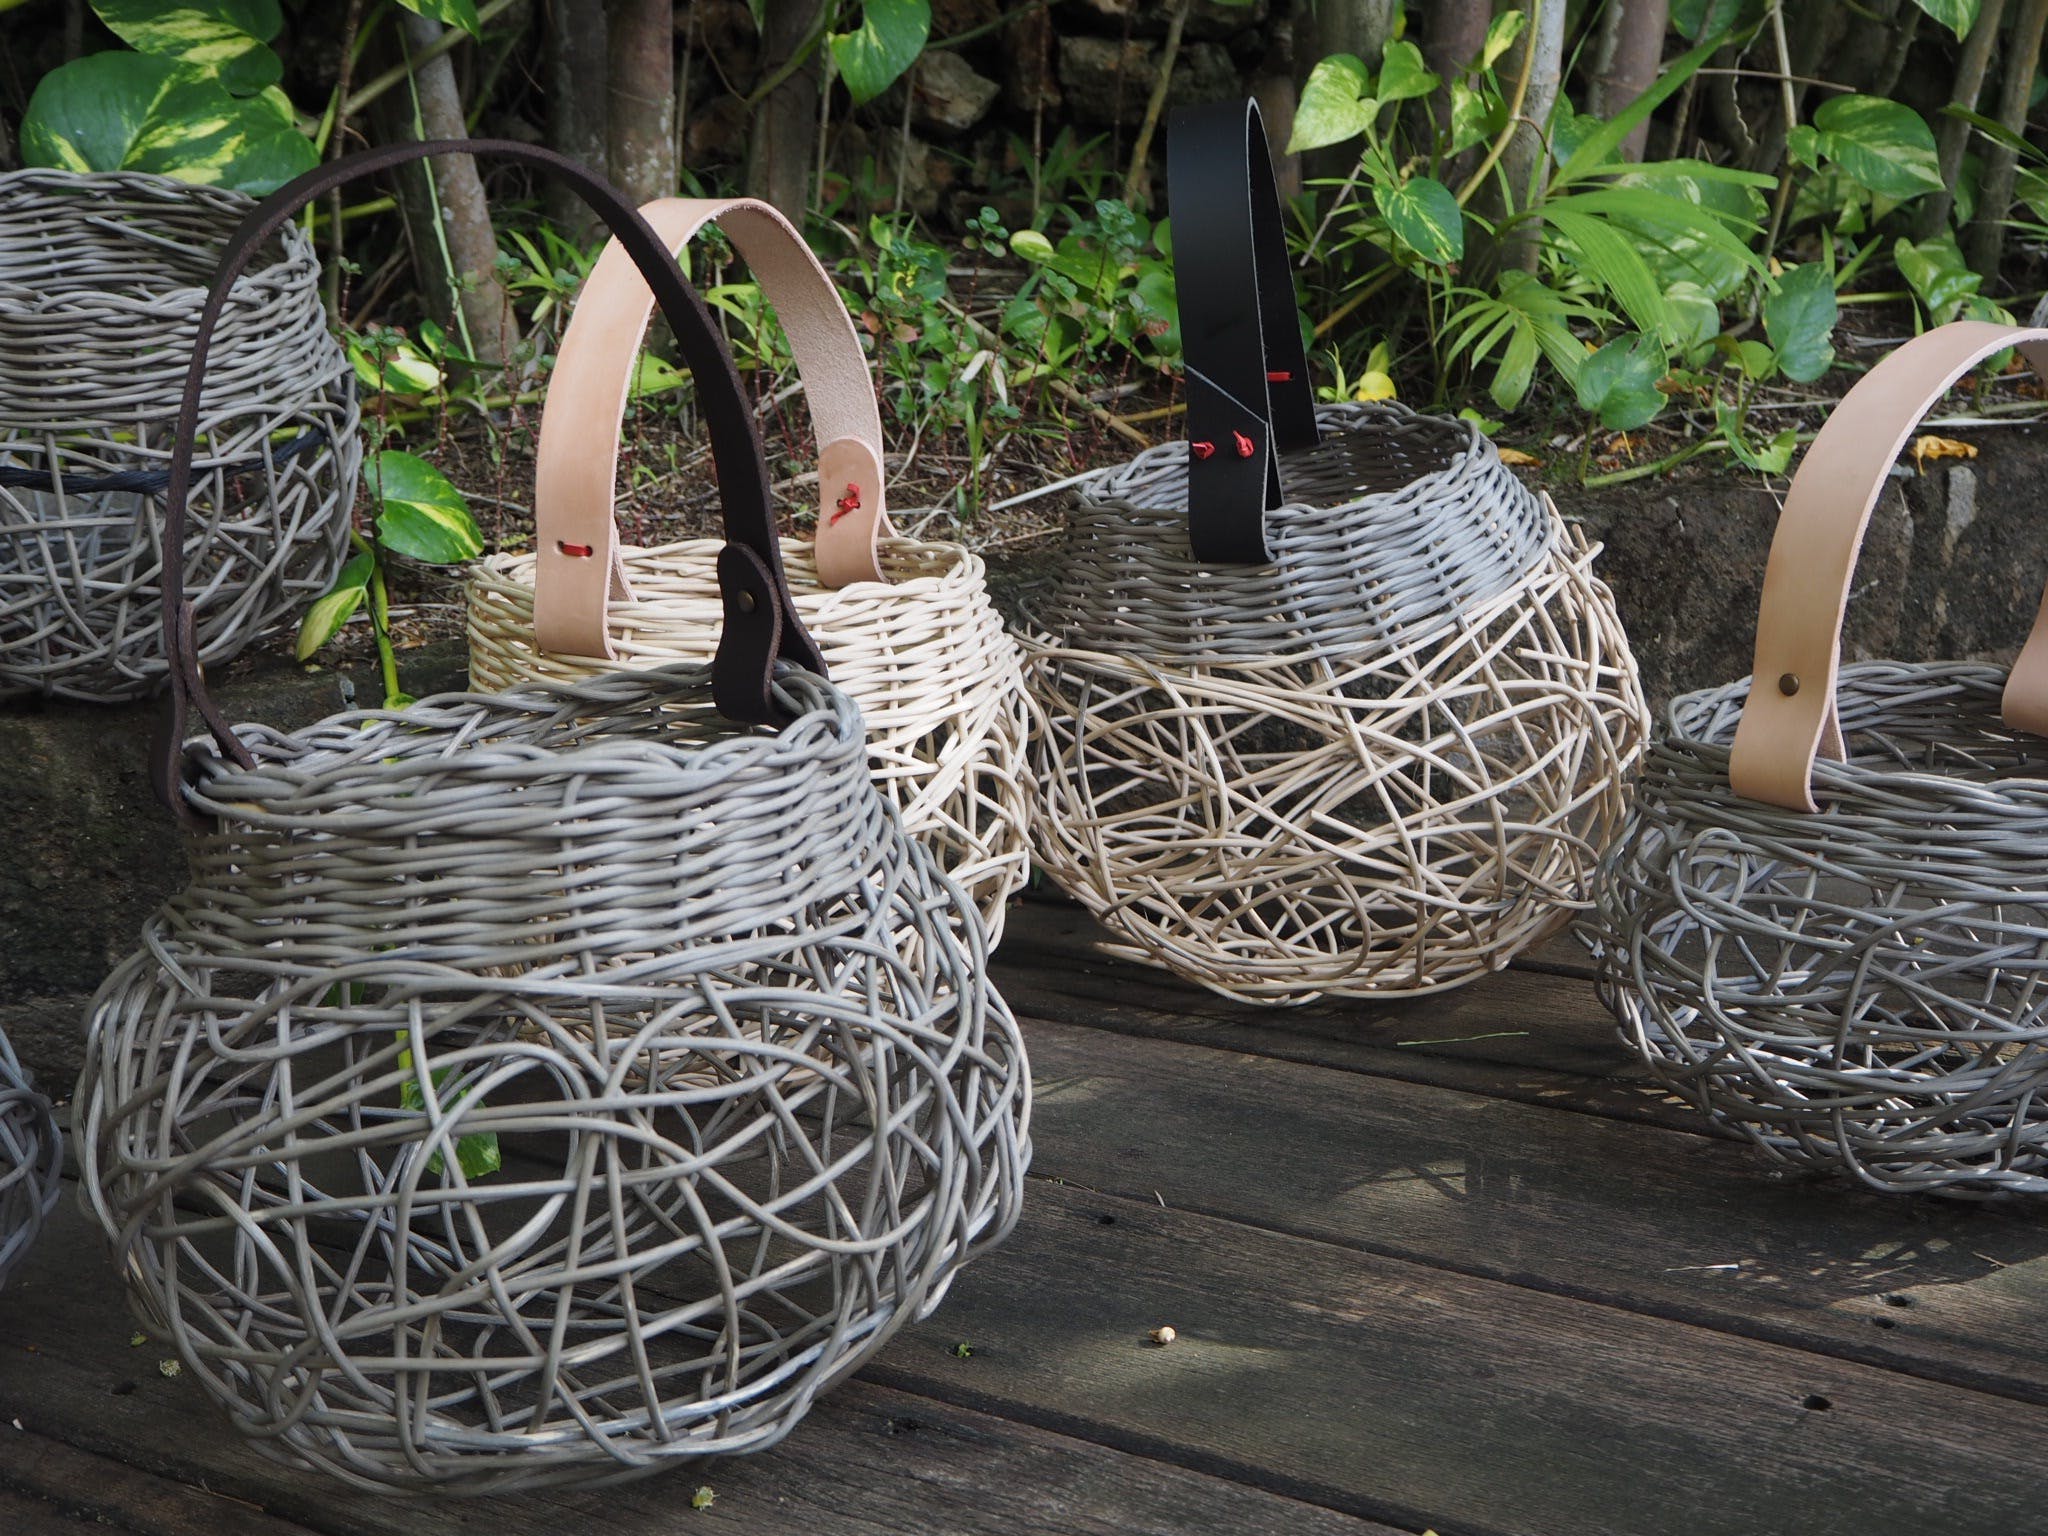 Weaving Woven Basket with Leather Handle - Melbourne Tourism